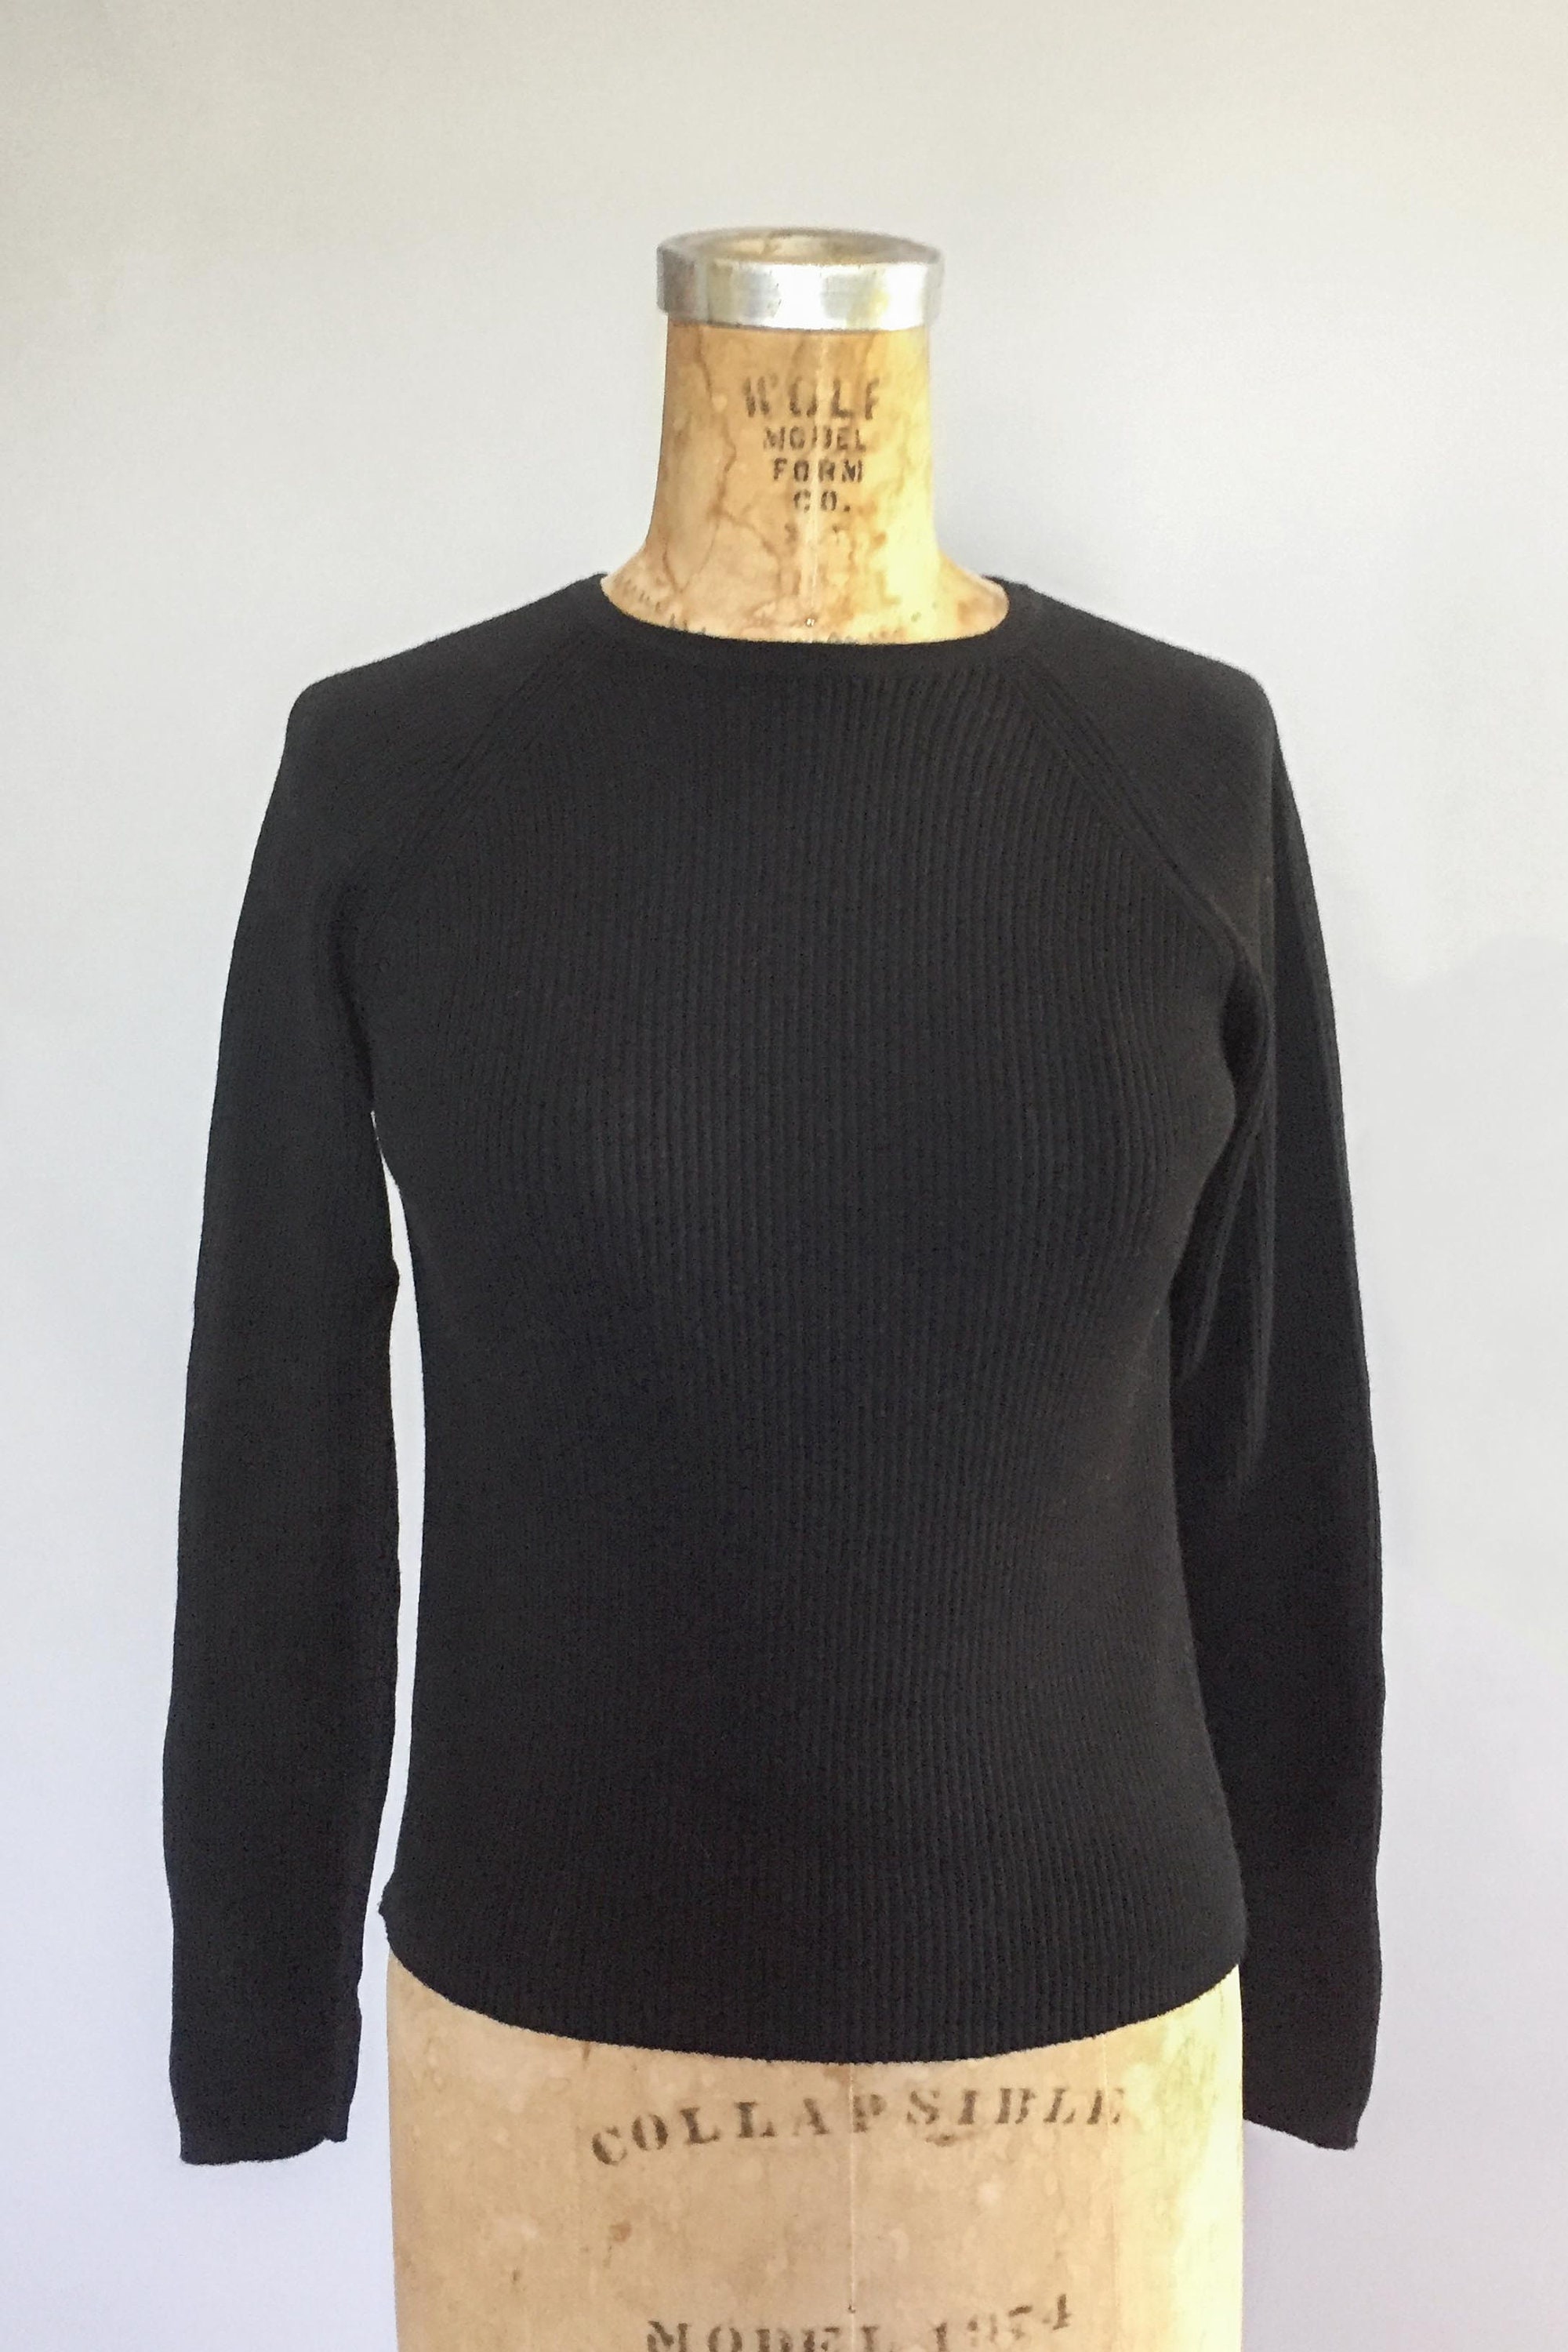 Vintage 1990s 90s black ribbed cropped sweater Extra small XS S